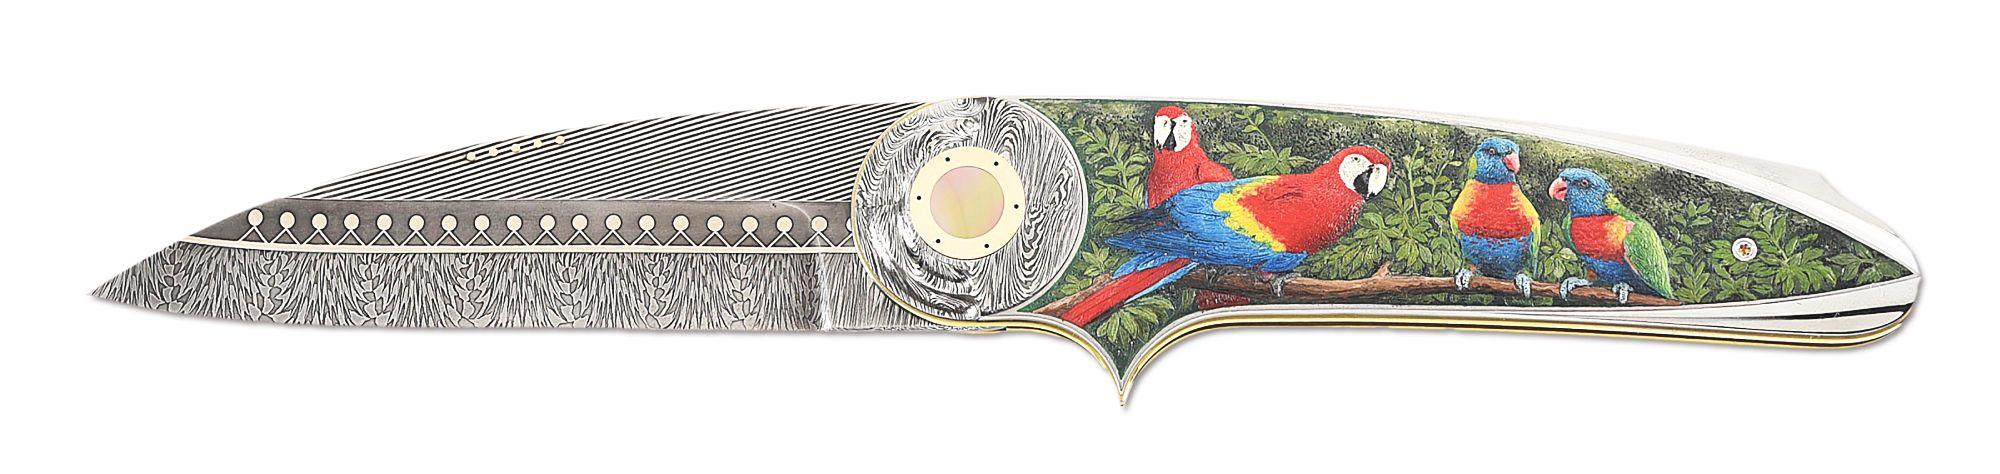 OWEN WOOD FOLDER ENGRAVED WITH PARROTS BY MARIO TERZI.